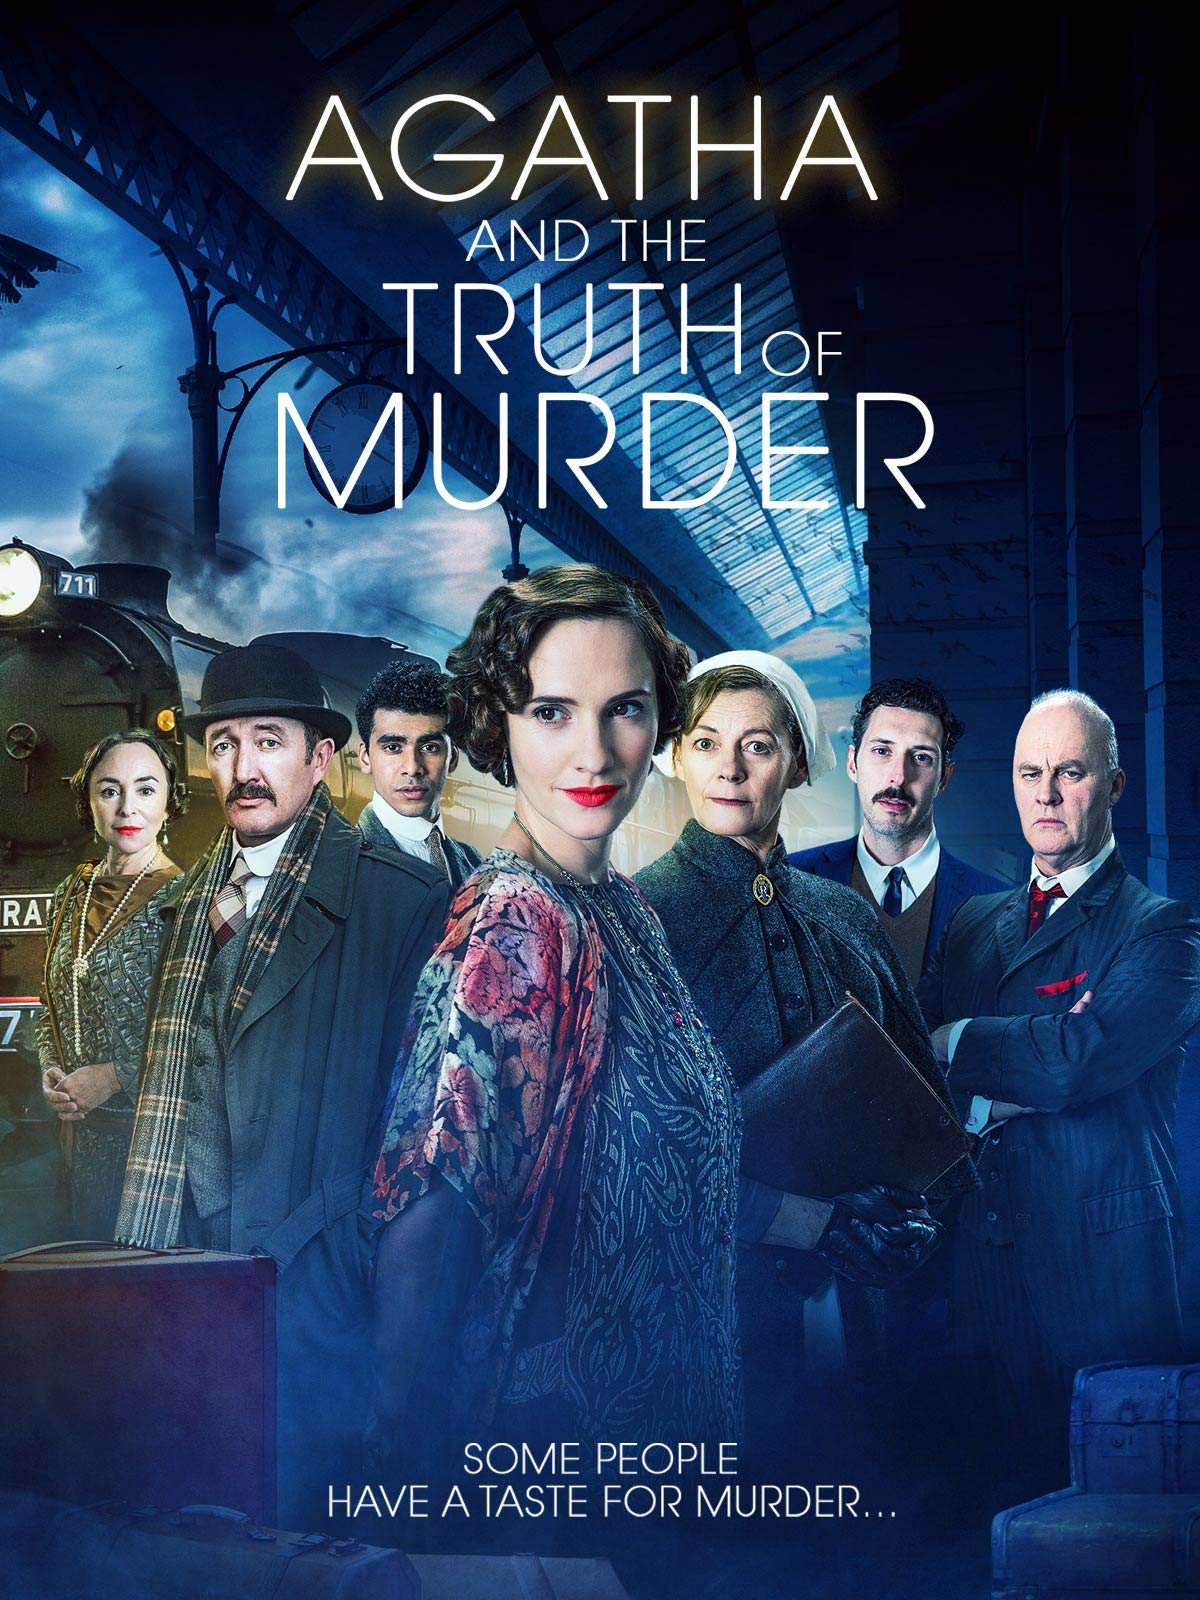 Agatha Christie and the Truth of Murder